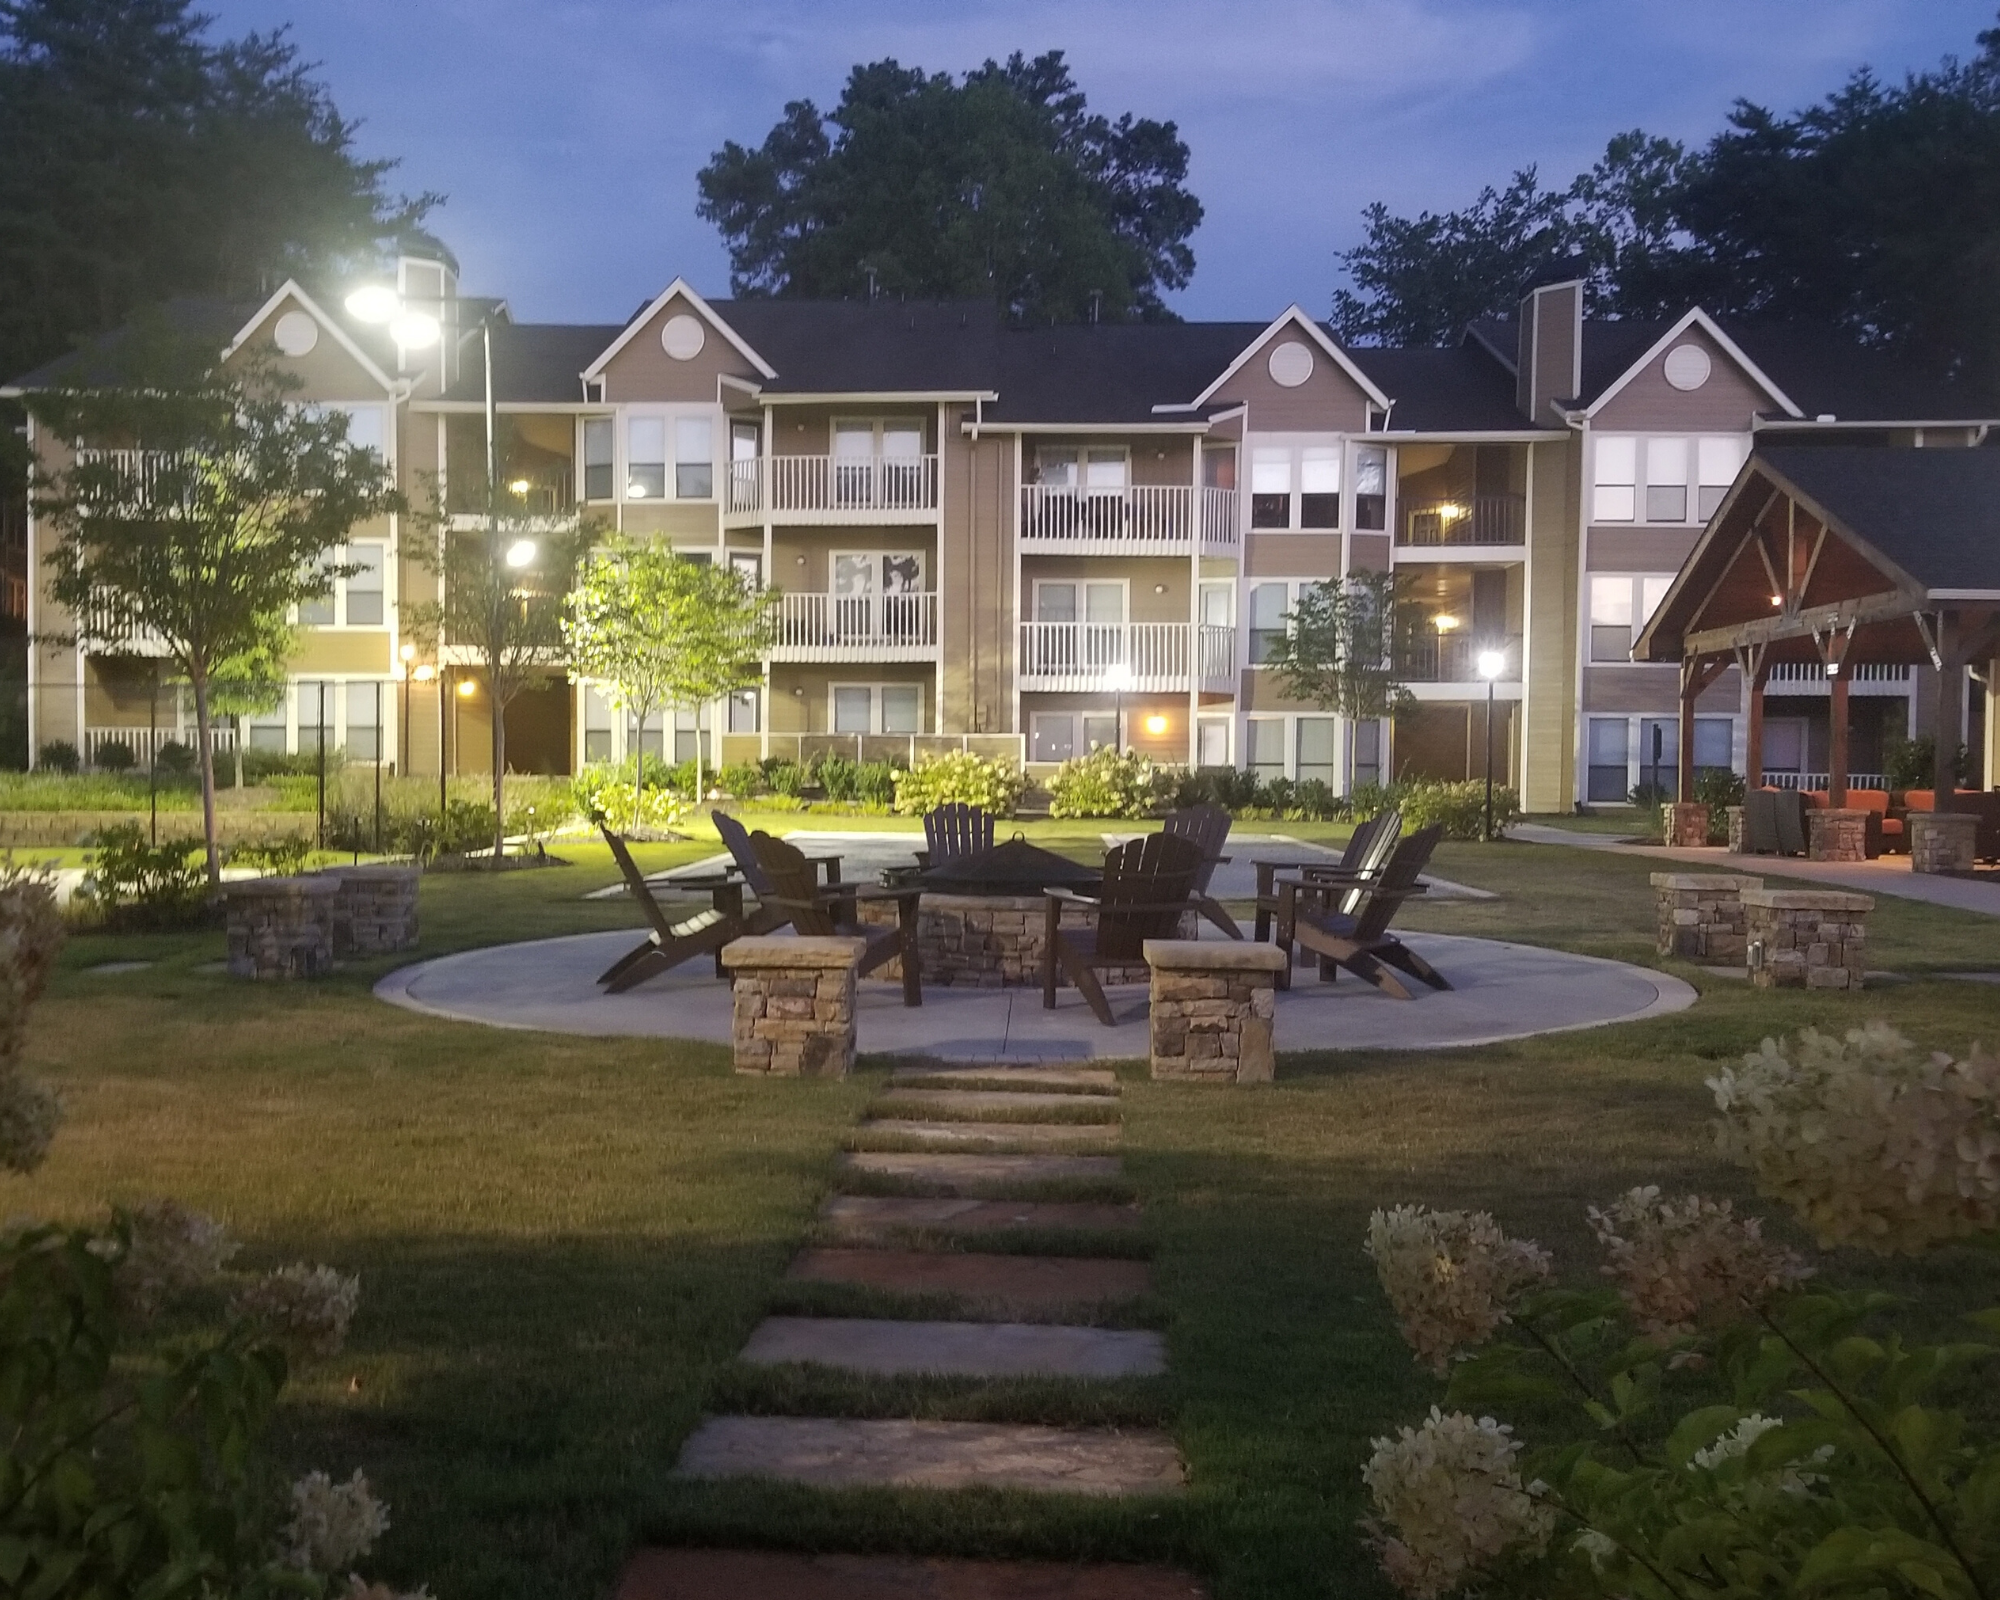 The Arbors at Breckinridge Apartments FirePit in Duluth, GA